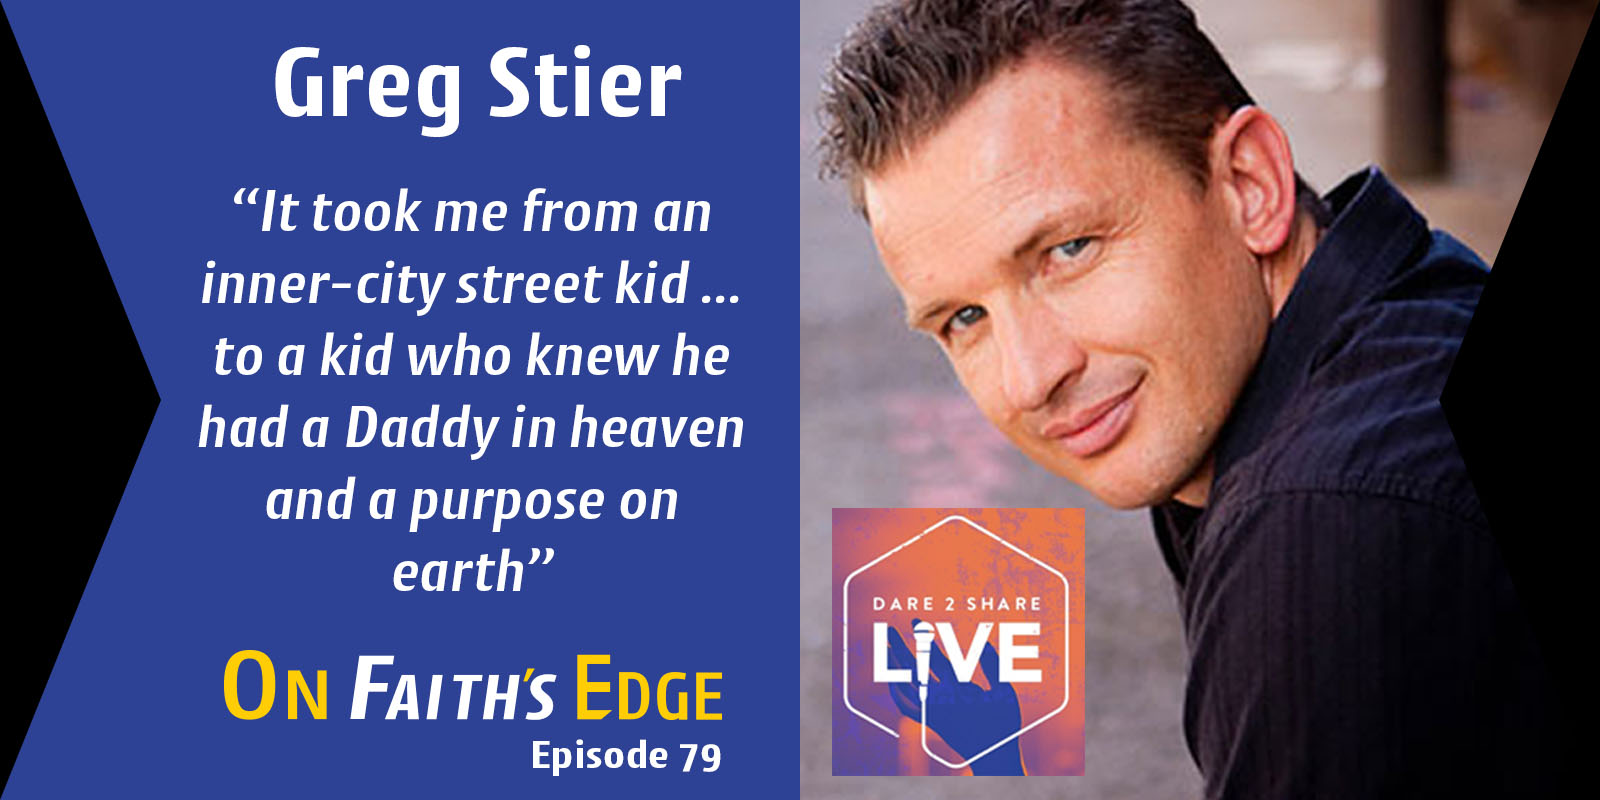 Energizing Teens to Live Their Faith – Speaker and Author Greg Stier | Episode 79